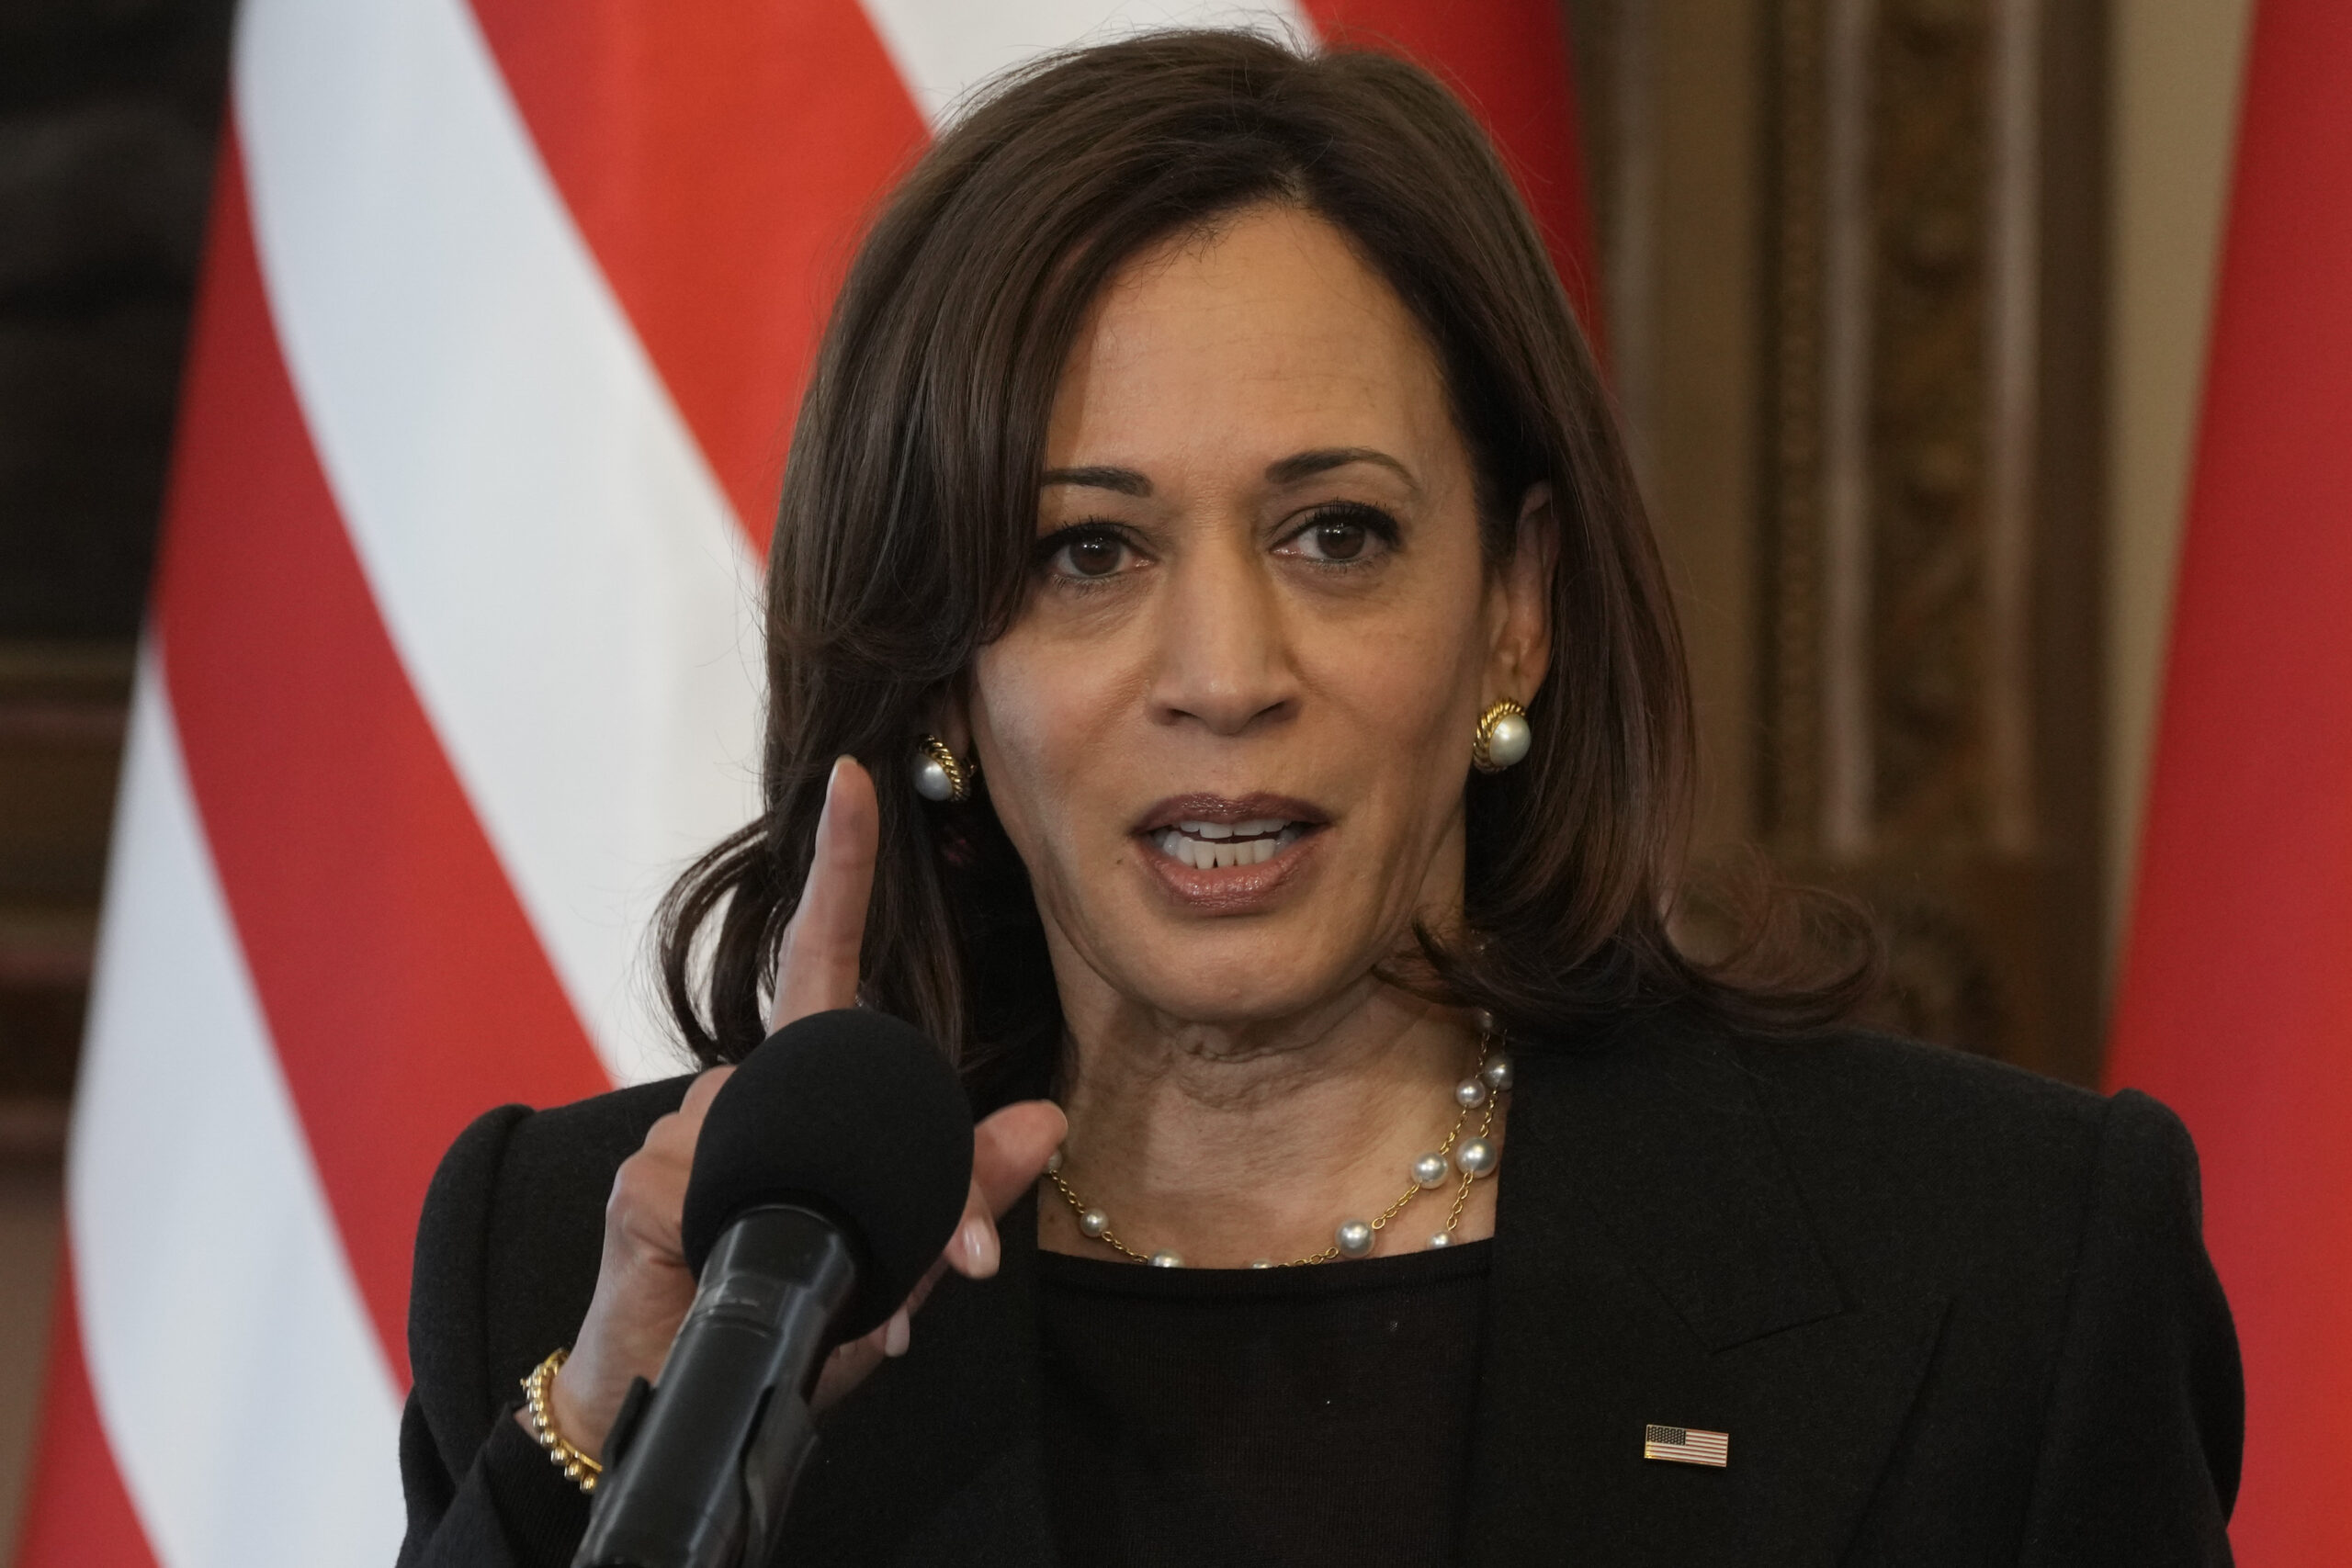 US Vice President Kamala Harris speaks during a joint press conference with Poland's President Andrzej Duda on the occasion of their meeting at Belwelder Palace, in Warsaw, Poland, Thursday, March 10, 2022. (AP Photo/Czarek Sokolowski)